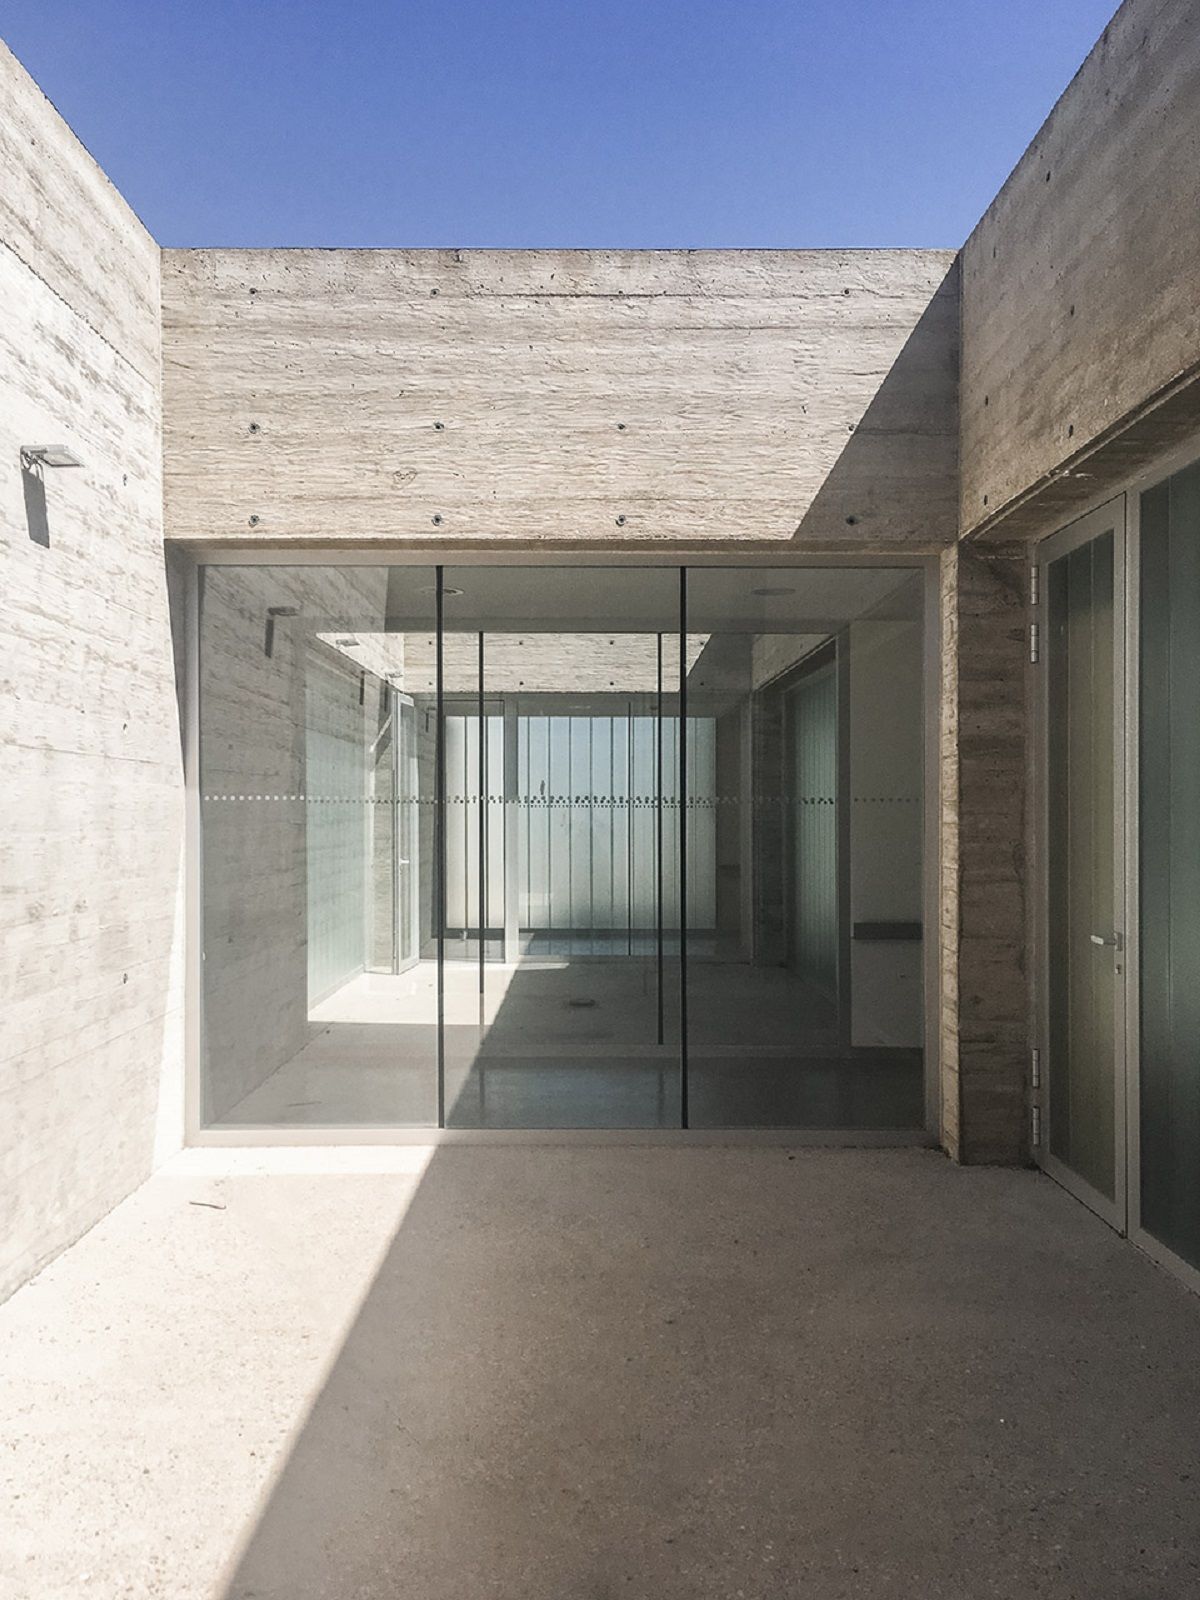 009 day care center for people with alzheimers disease in benavente by studiovra